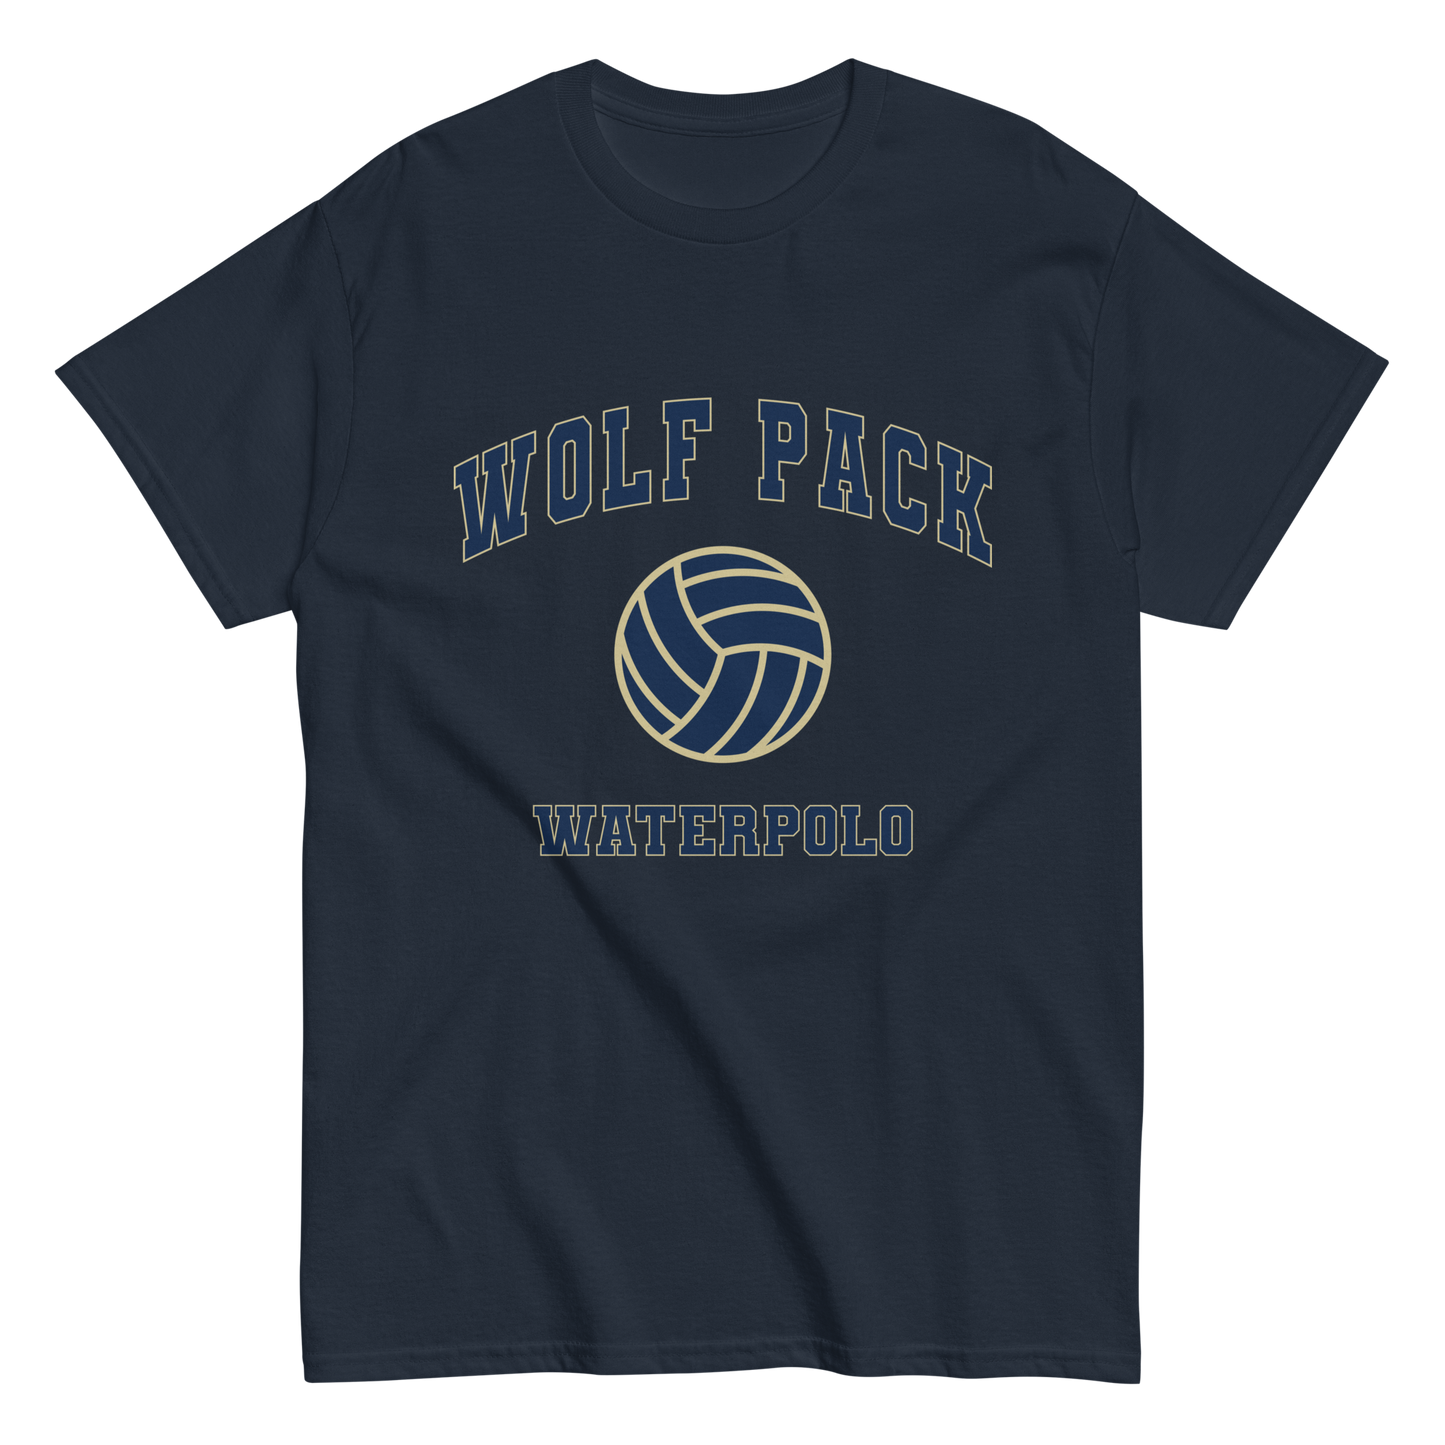 West Water polo classic tee